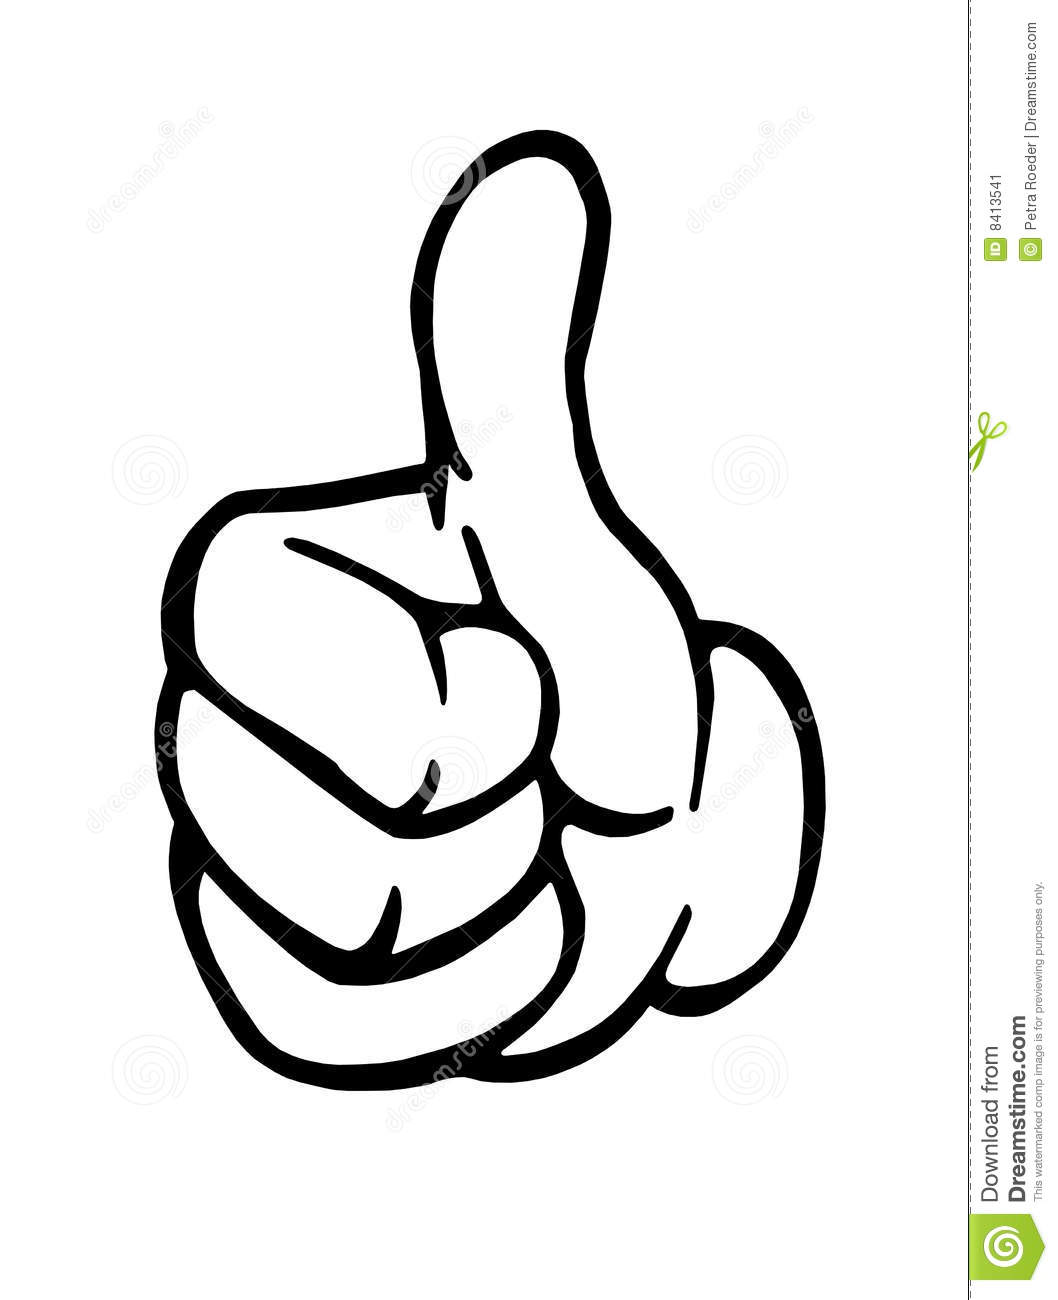 Illustration Of Hand Making Thumbs Up Sign Isolated On White